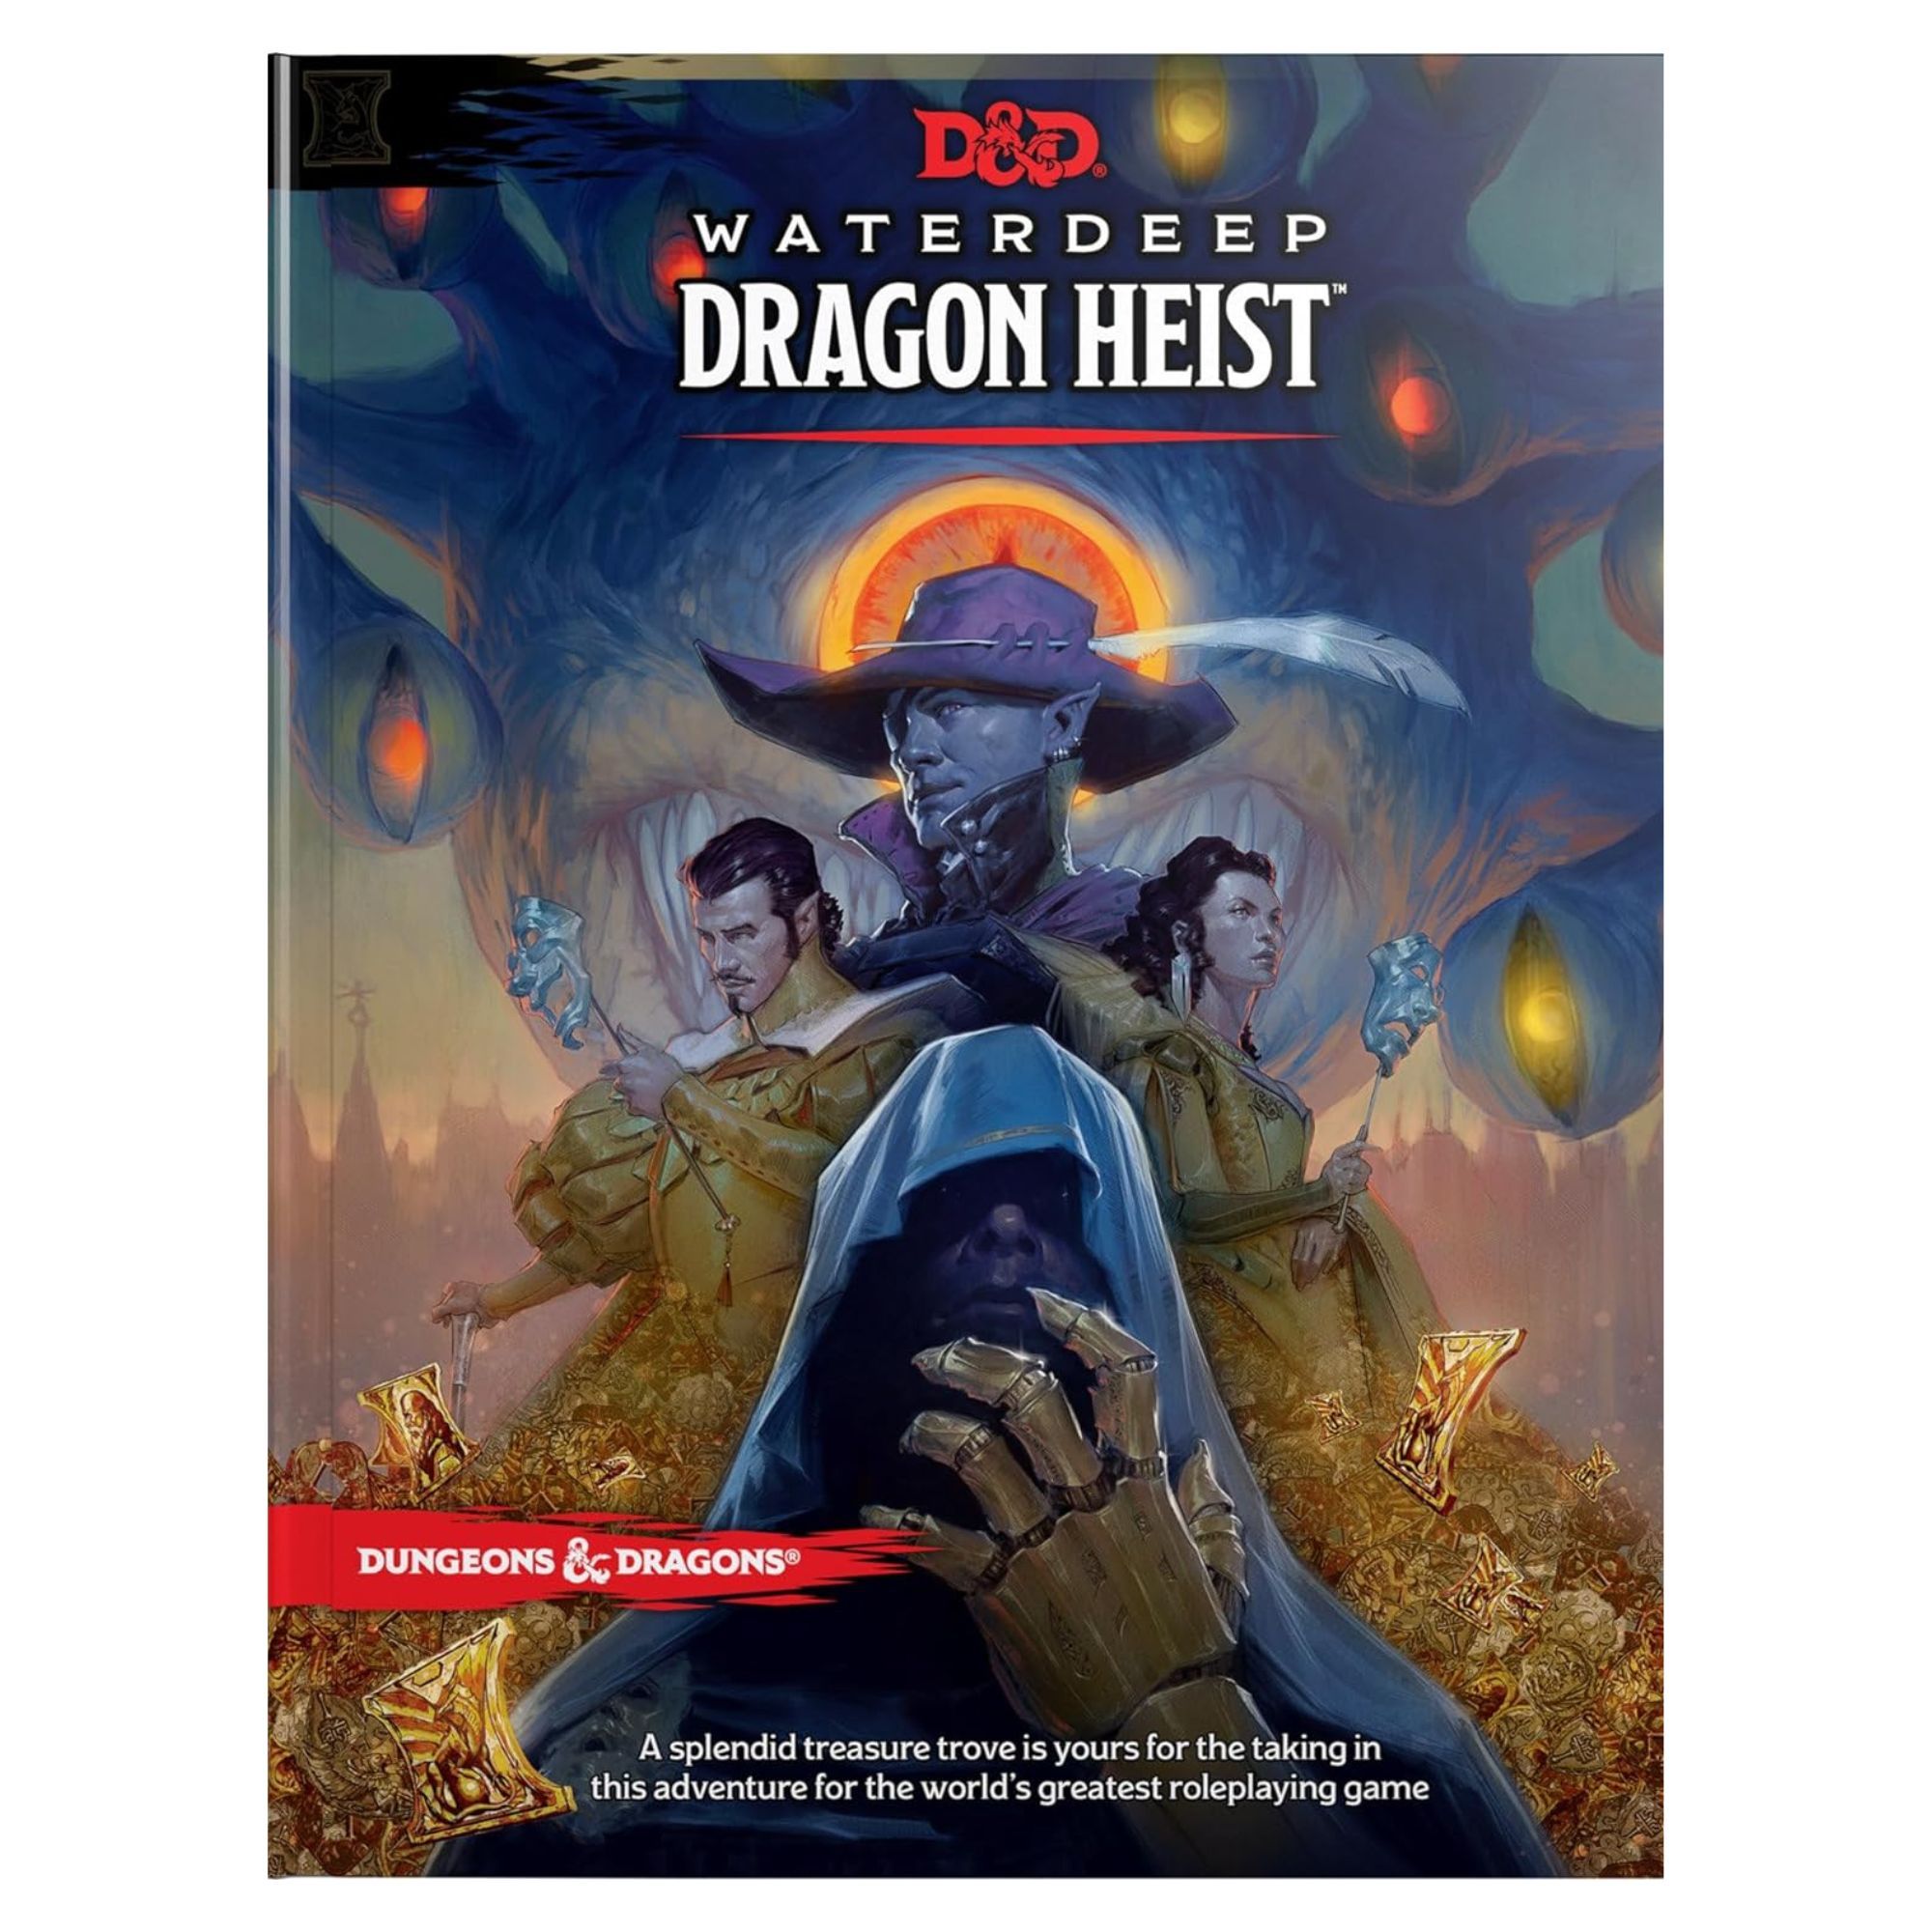 Product still of the Dungeons & Dragons Waterdeep Dragon Heist Adventure Book on a white background